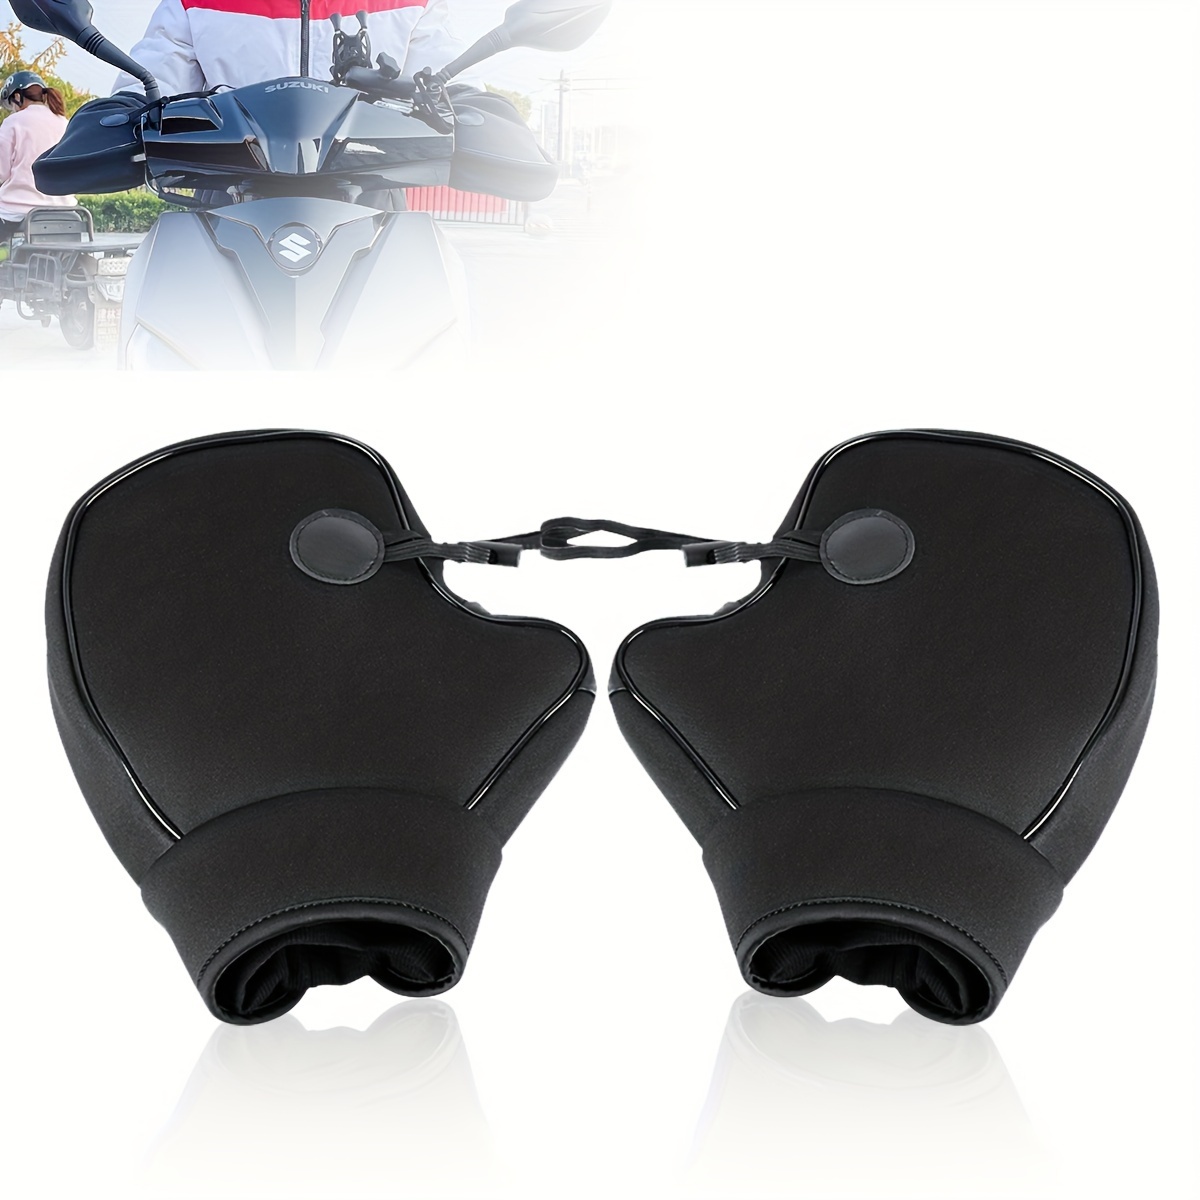 Moto Scooter Universel Guidon Hiver Froid Et Chaud Equitation